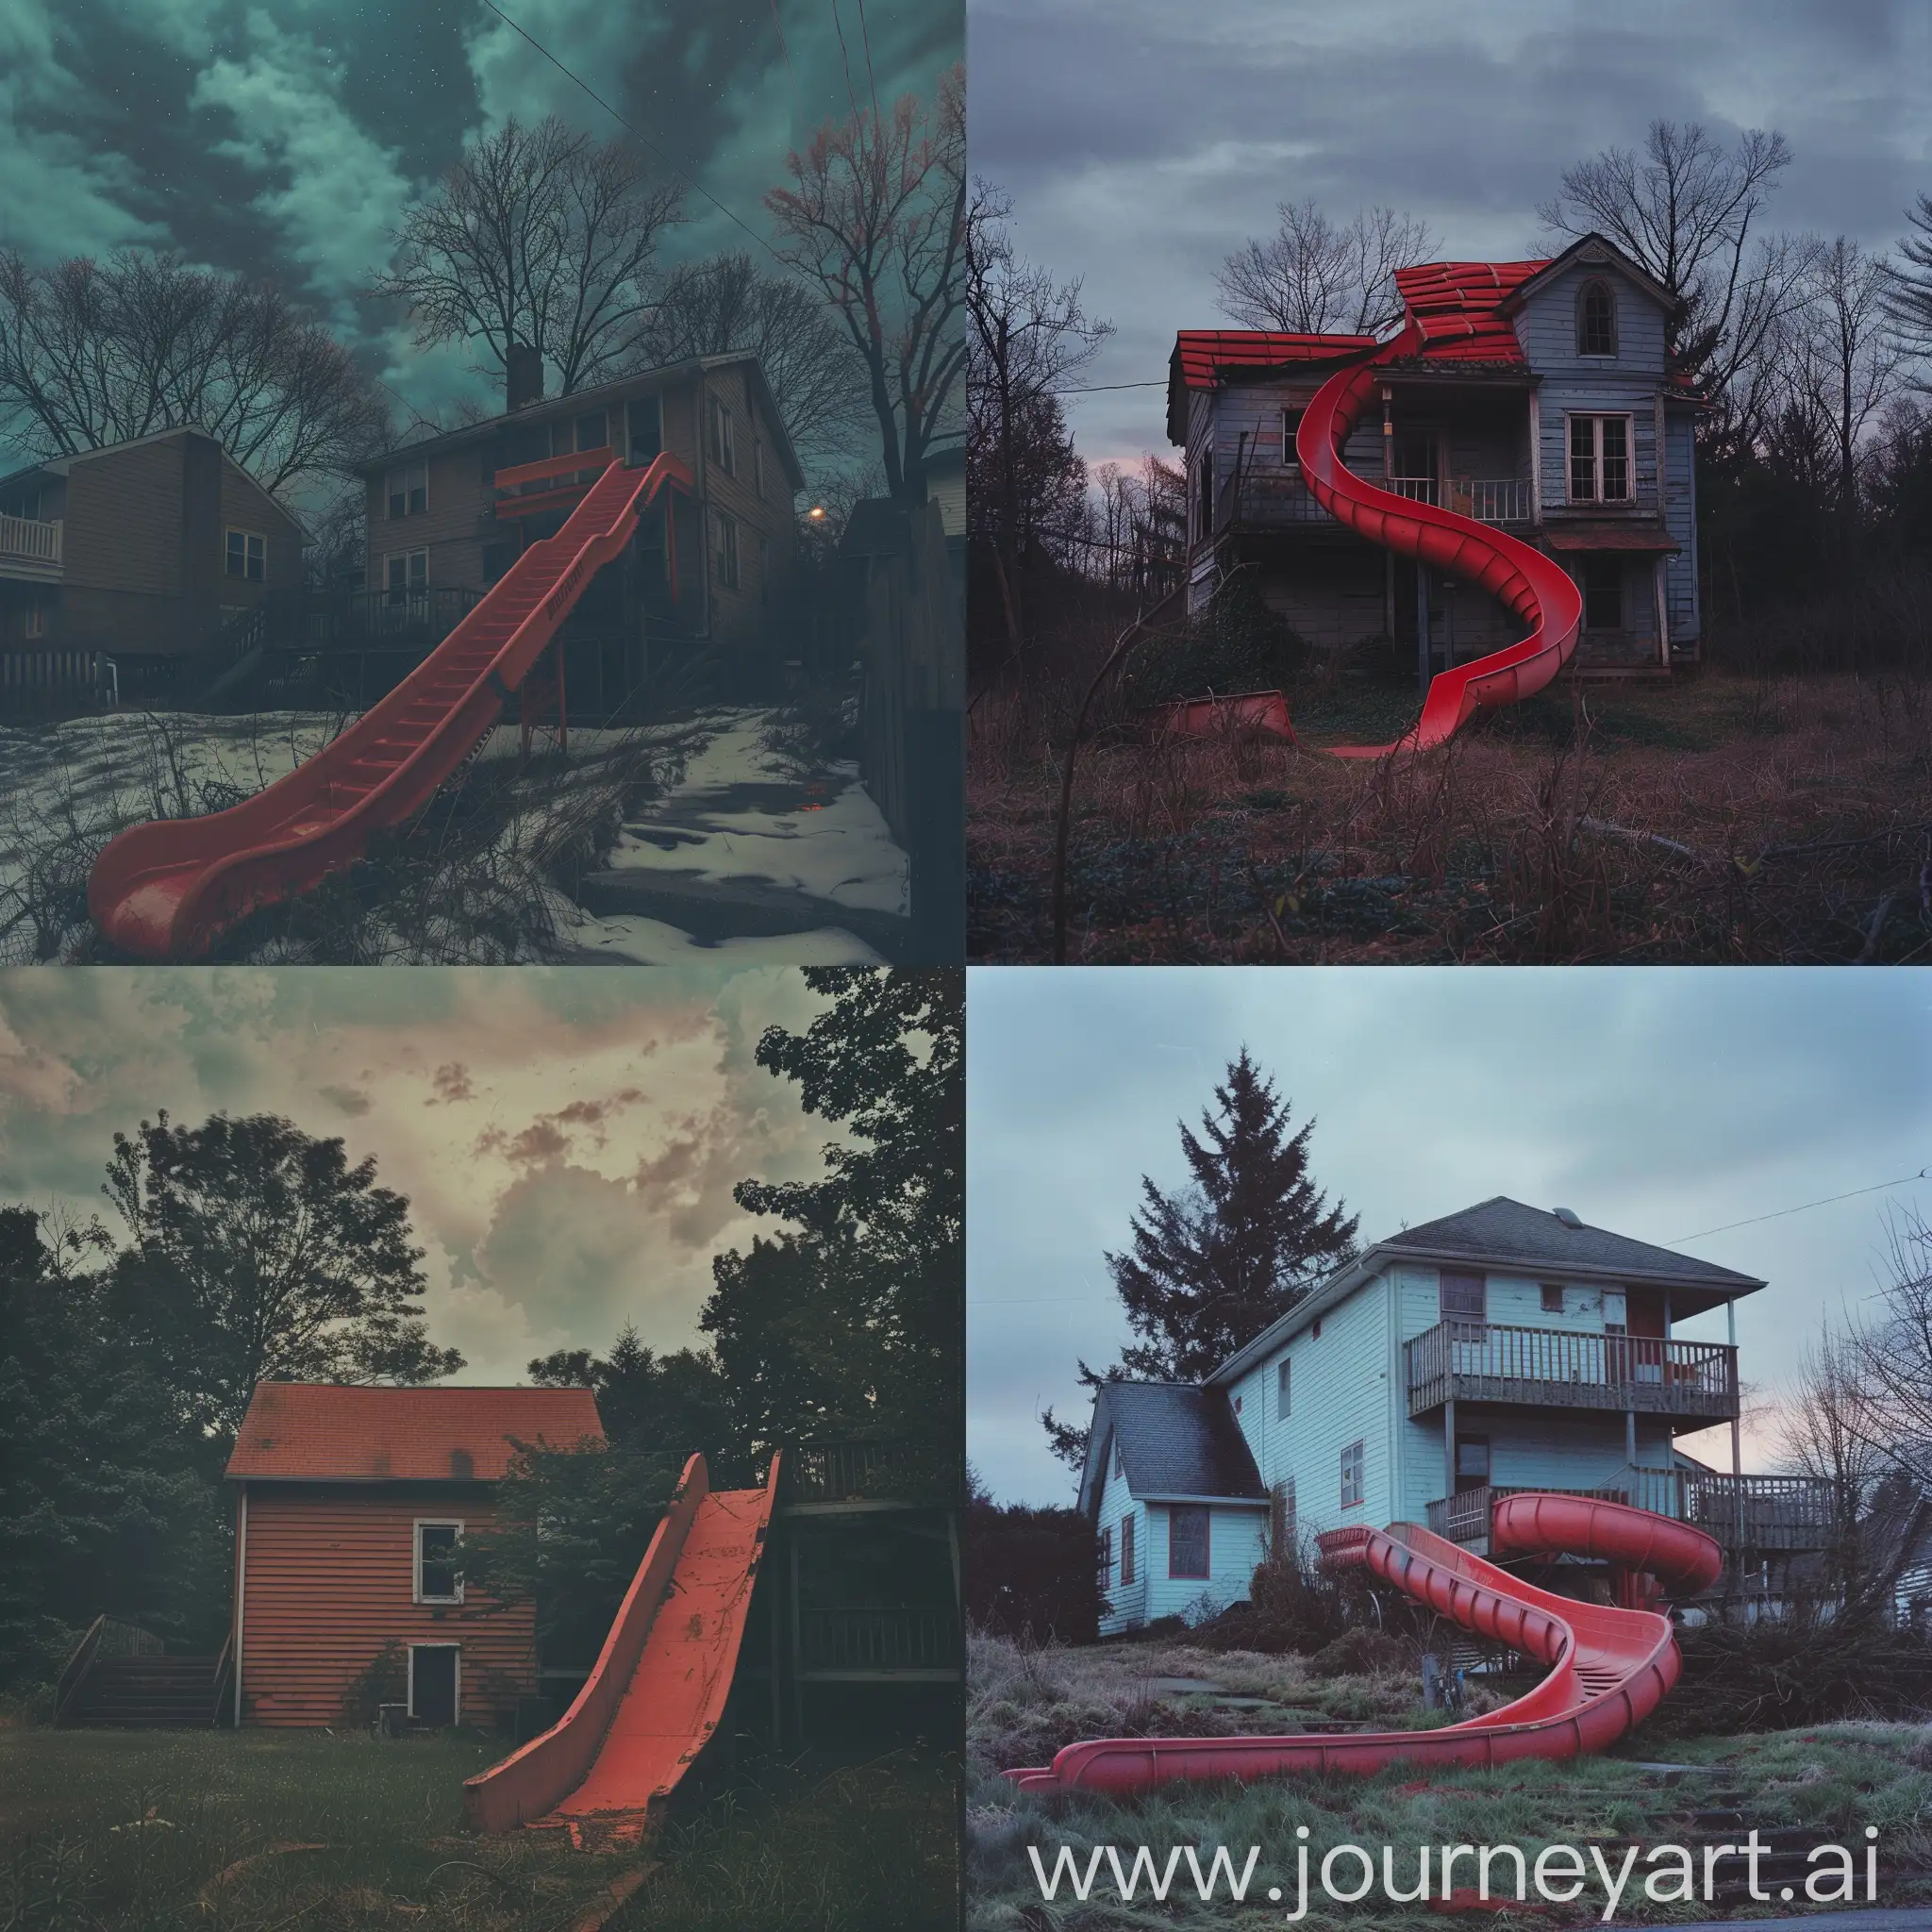 Nostalgic-Liminal-Space-with-Eerie-Fake-Sky-and-Red-Slide